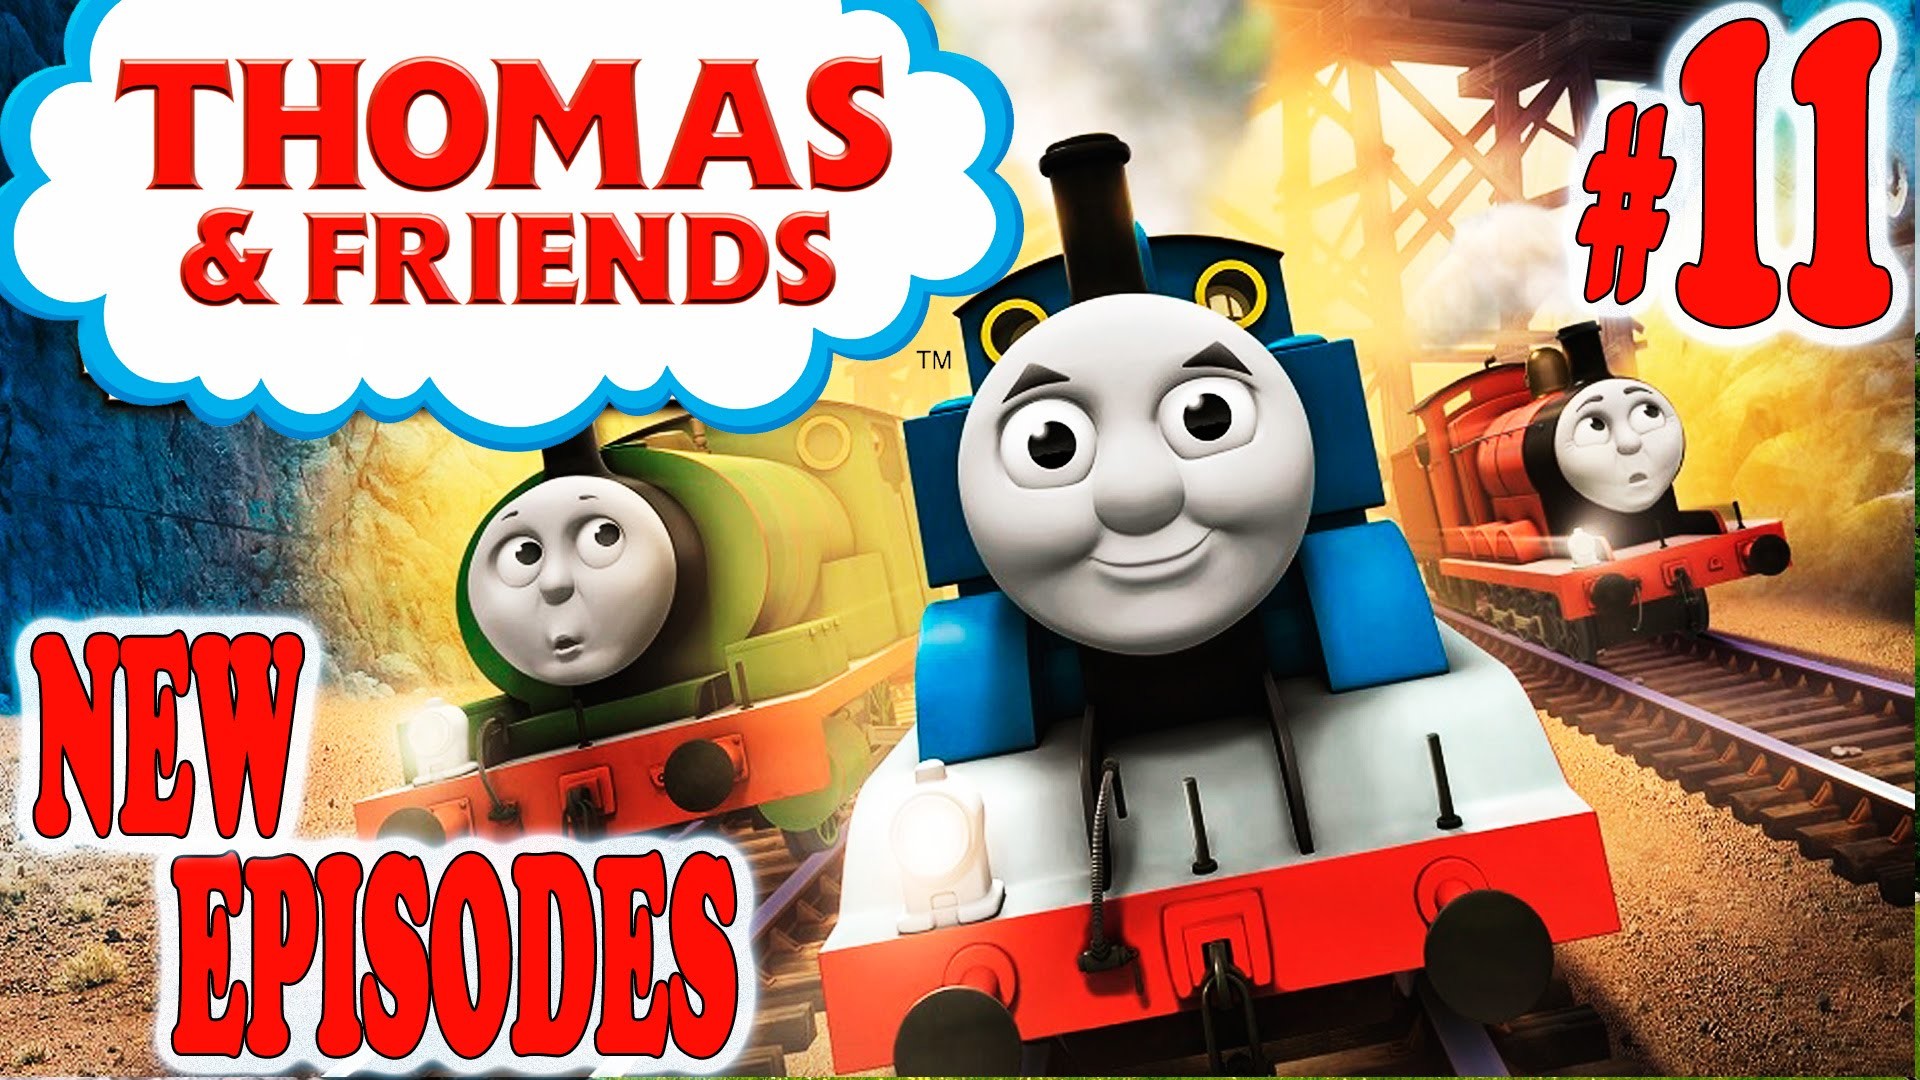 1920x1080 Thomas and Friends 2015 New Episodes, Thomas & Friends 2015 HD Series  Episode 11